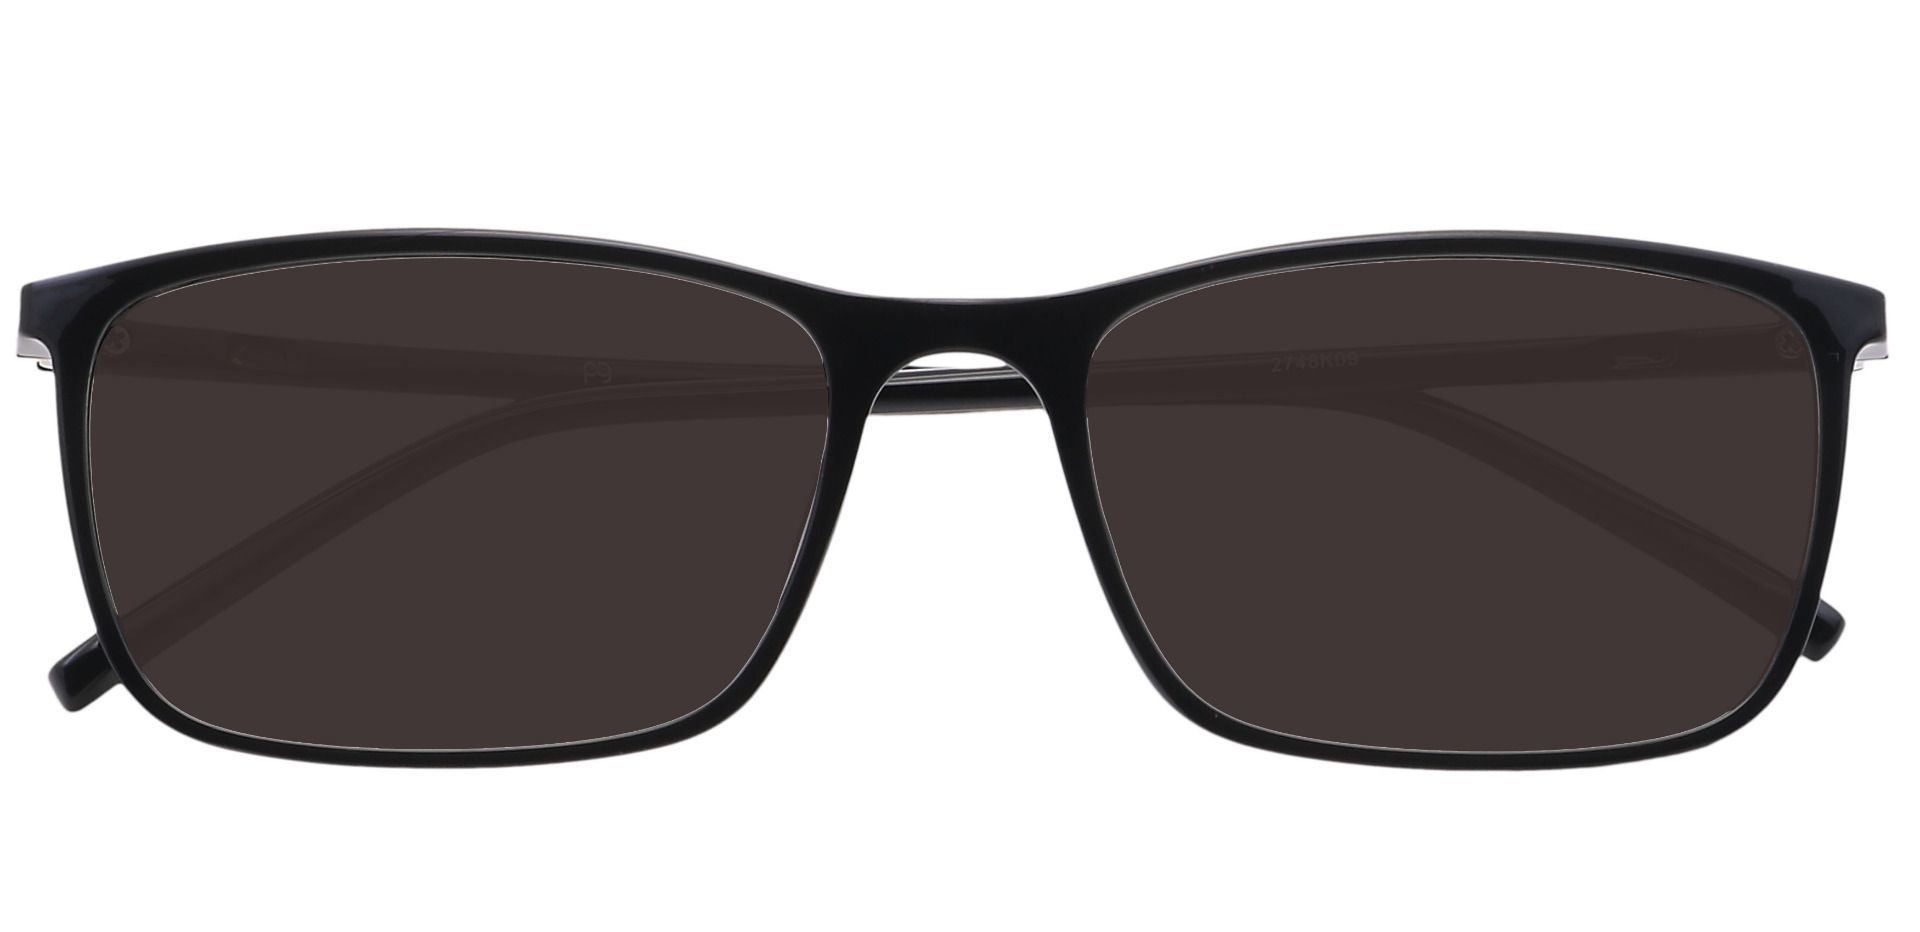 Fuji Rectangle Lined Bifocal Sunglasses - Black Frame With Gray Lenses